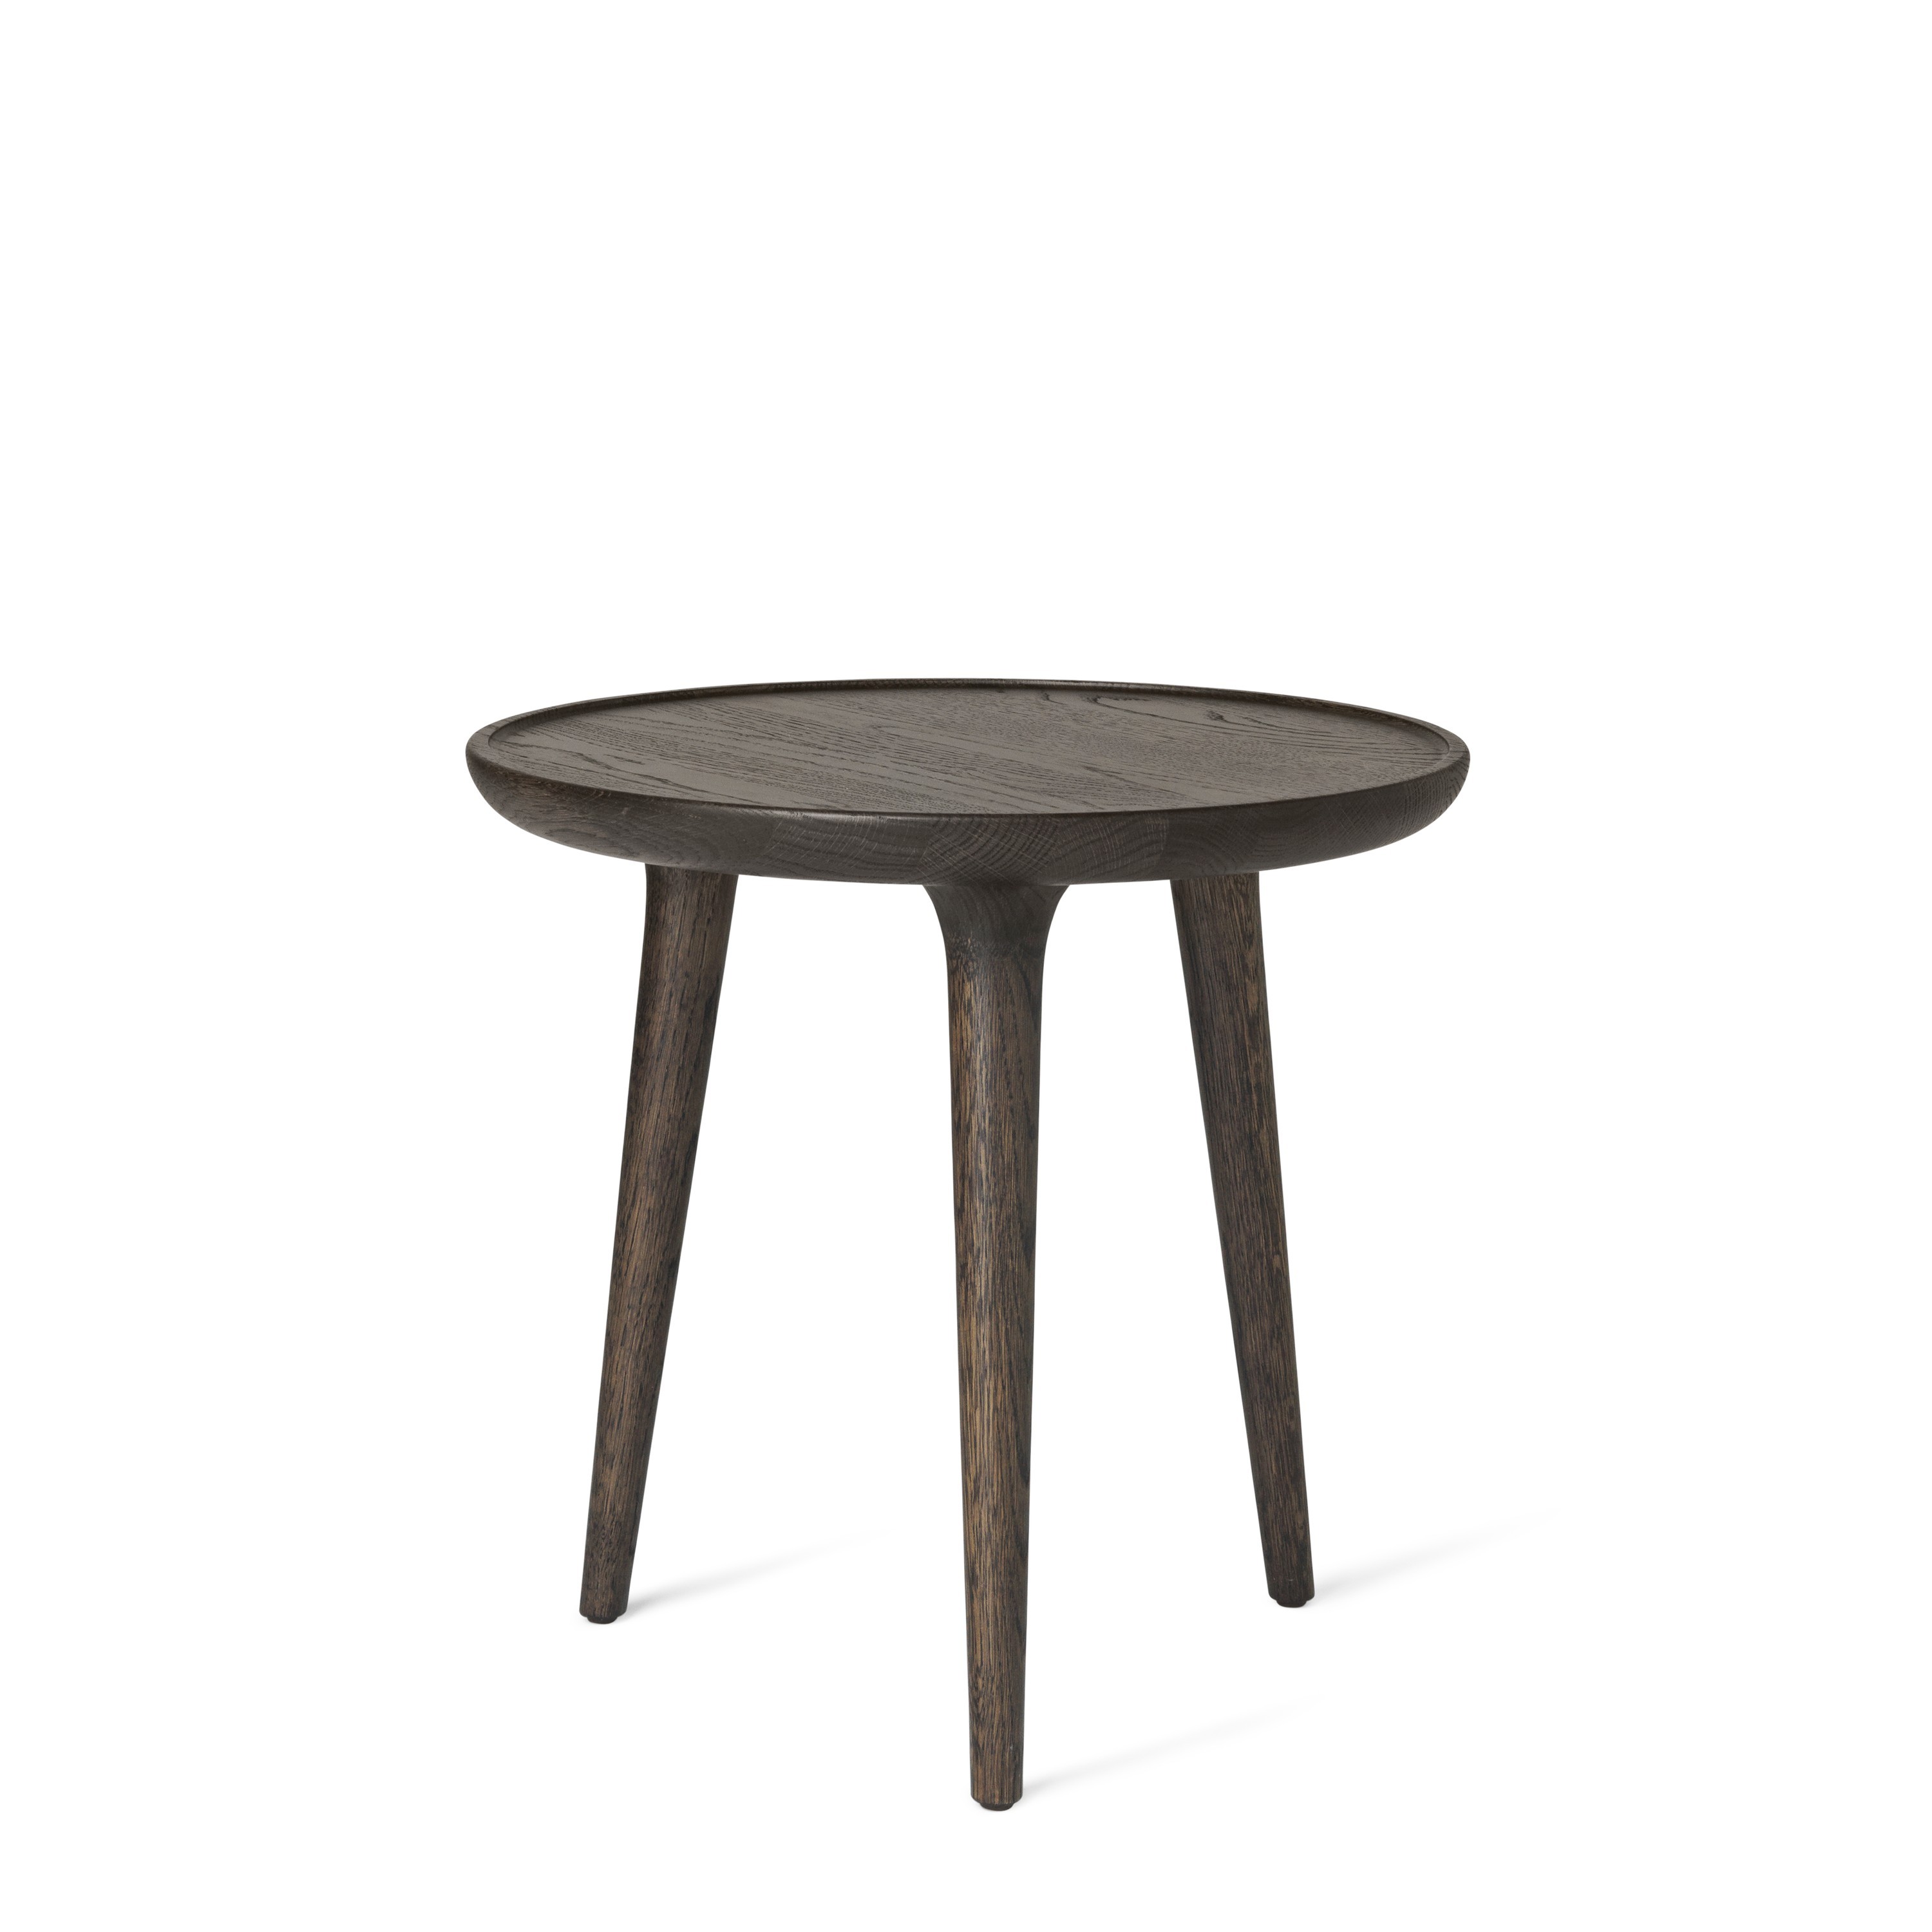 mater accent side table sirka grey oak coffeetable small with drawer drum seat cover lightweight concrete furniture round marble dining hall console adjustable stool square